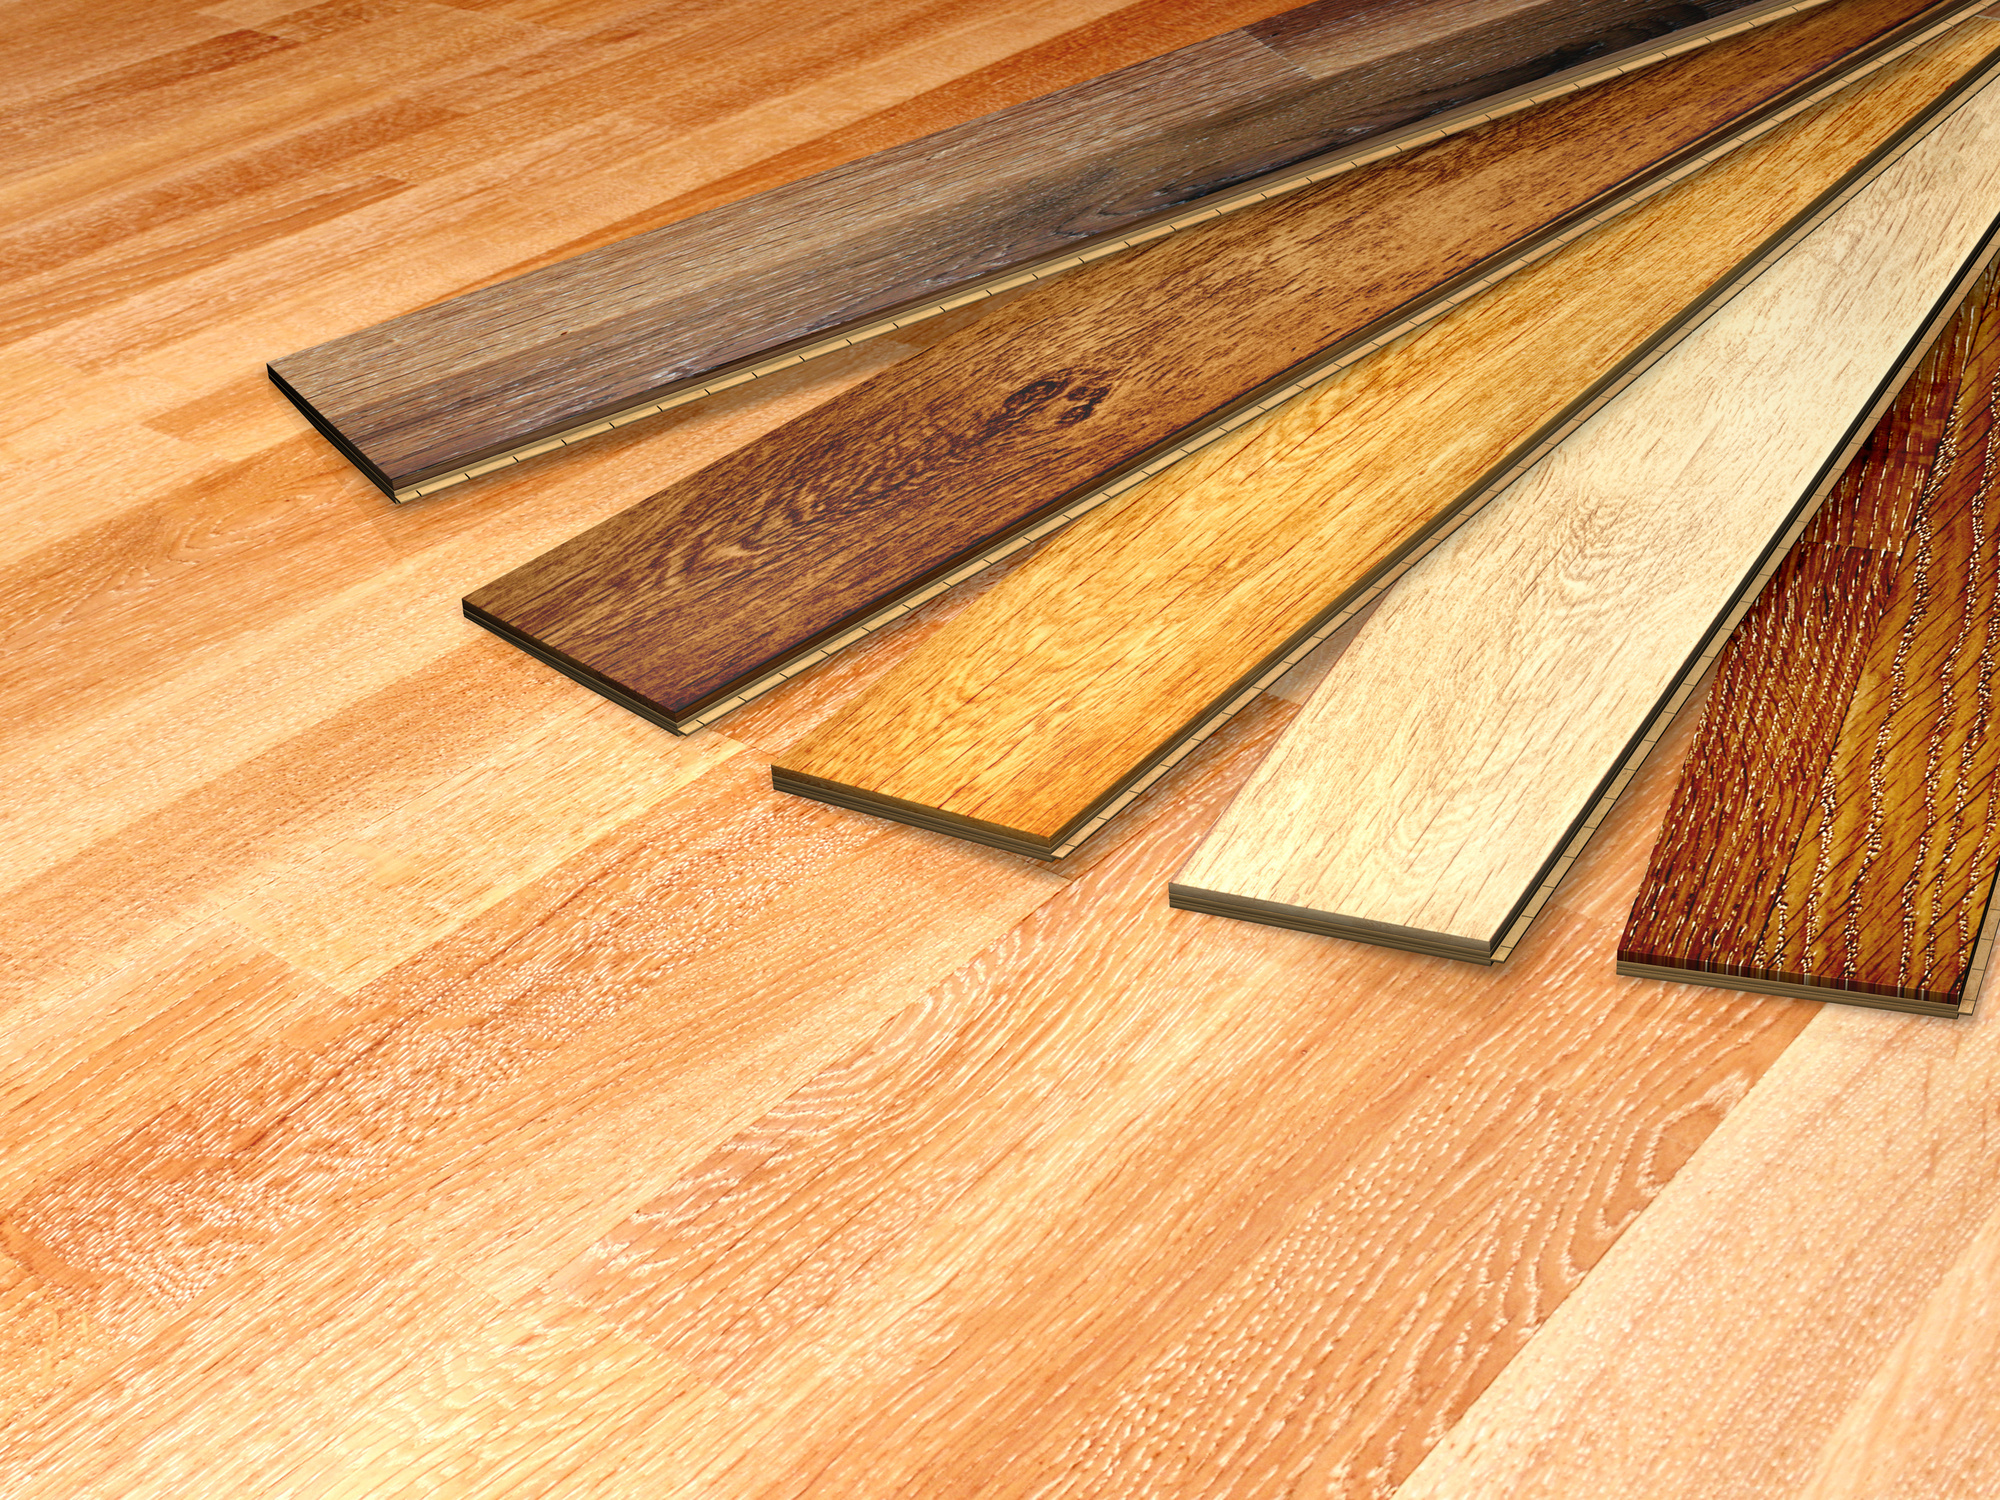 Whether you're giving a new home a major facelift or looking to spruce up your floors, explore the best hardwood floor colors.